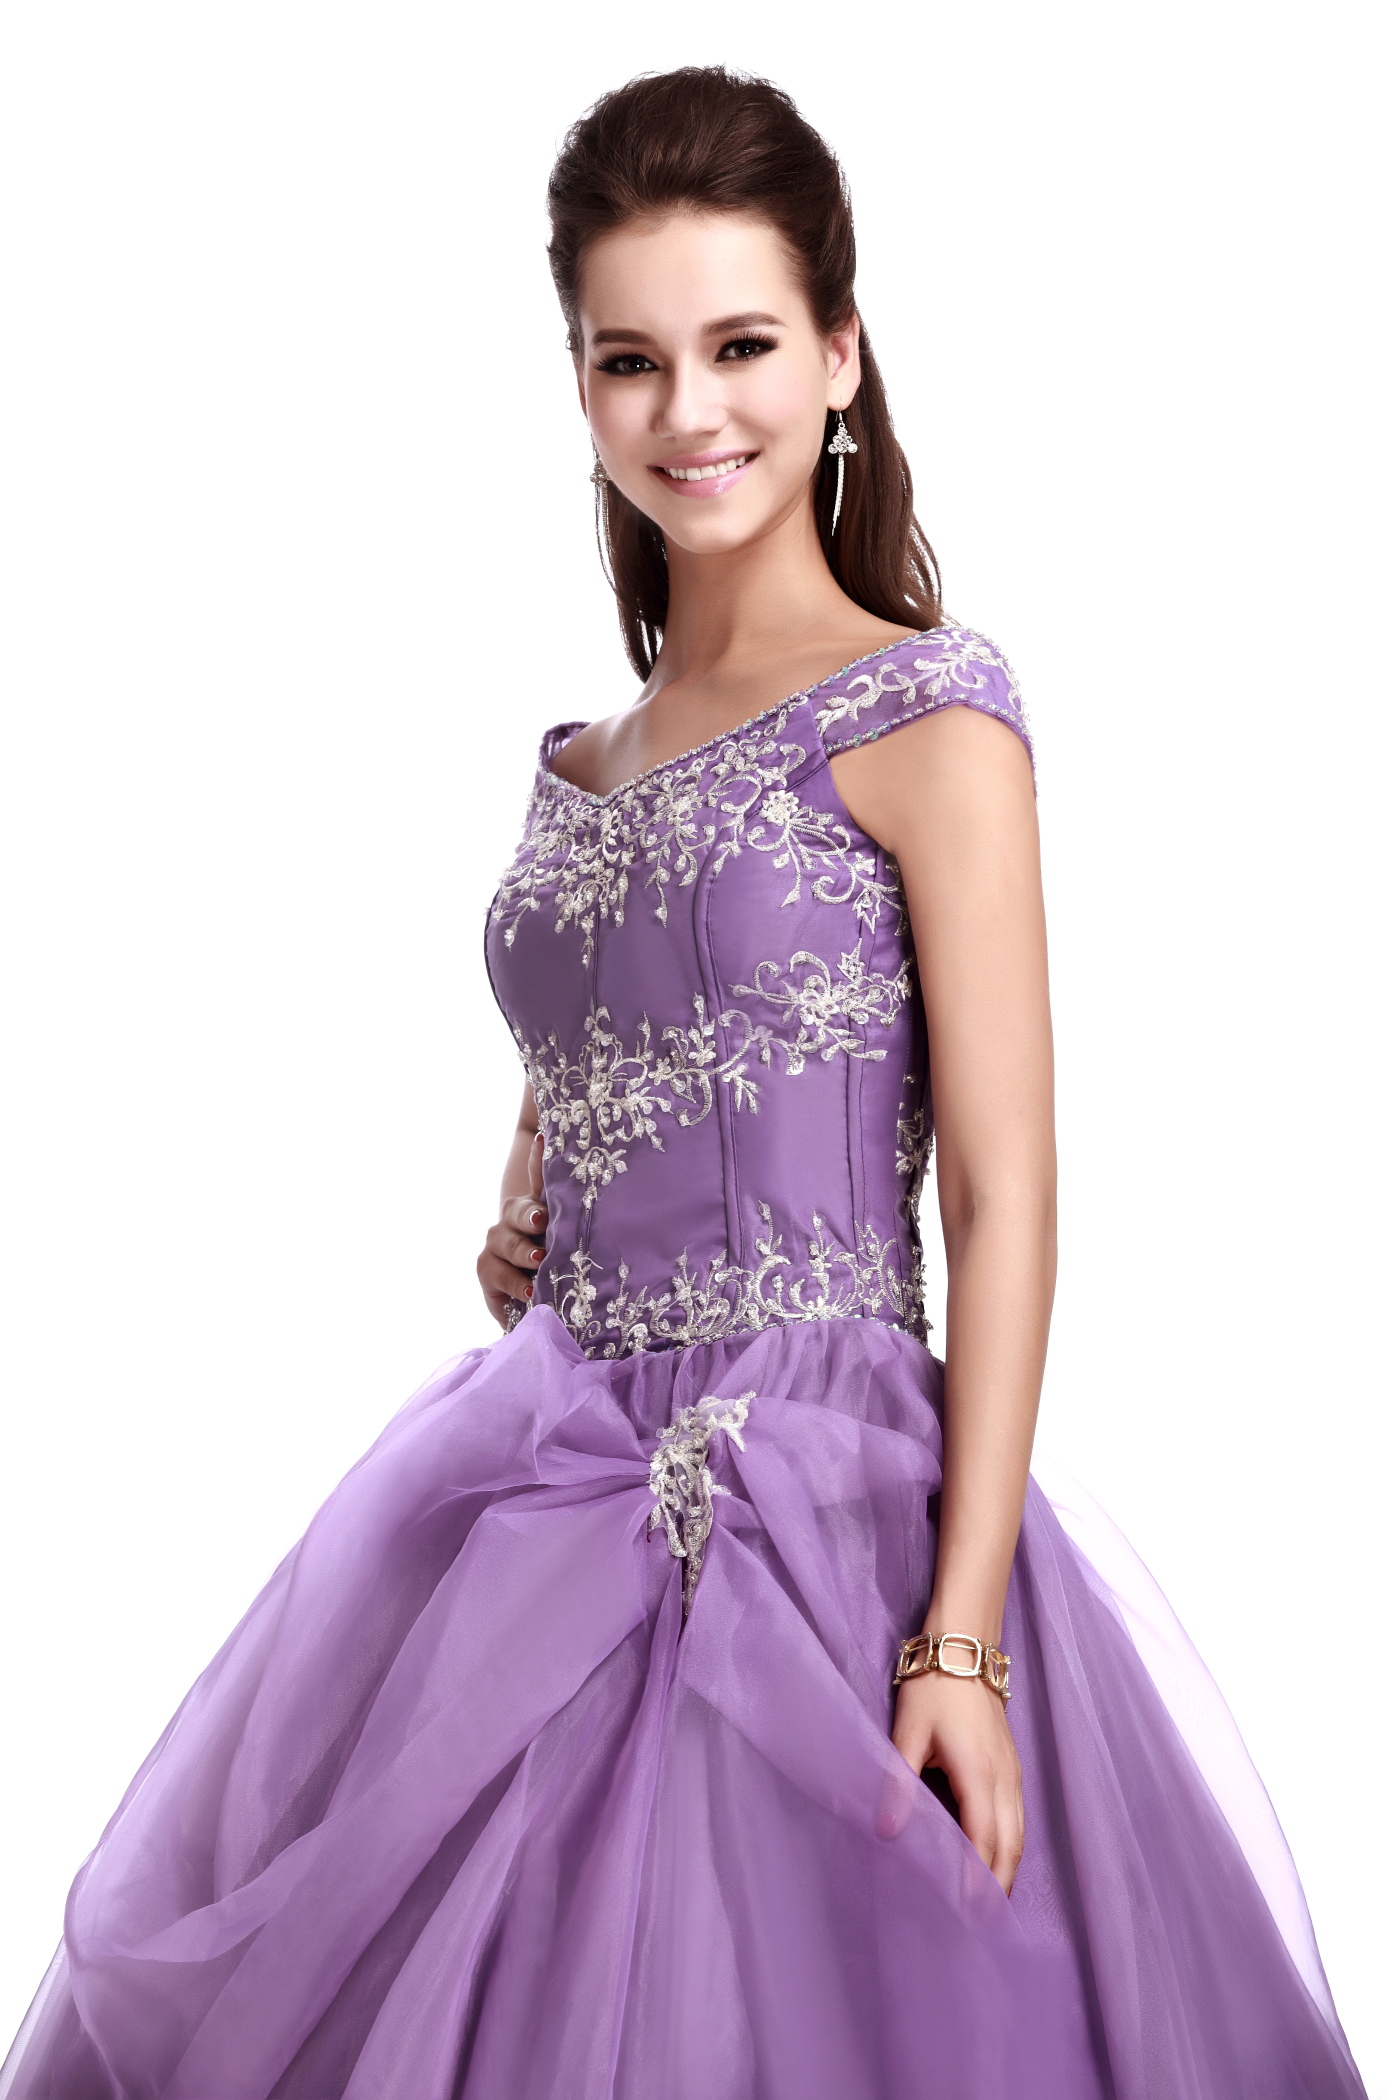 Off-the-Shoulder Embroidery Purple Ball Gown Quinceanera Dress